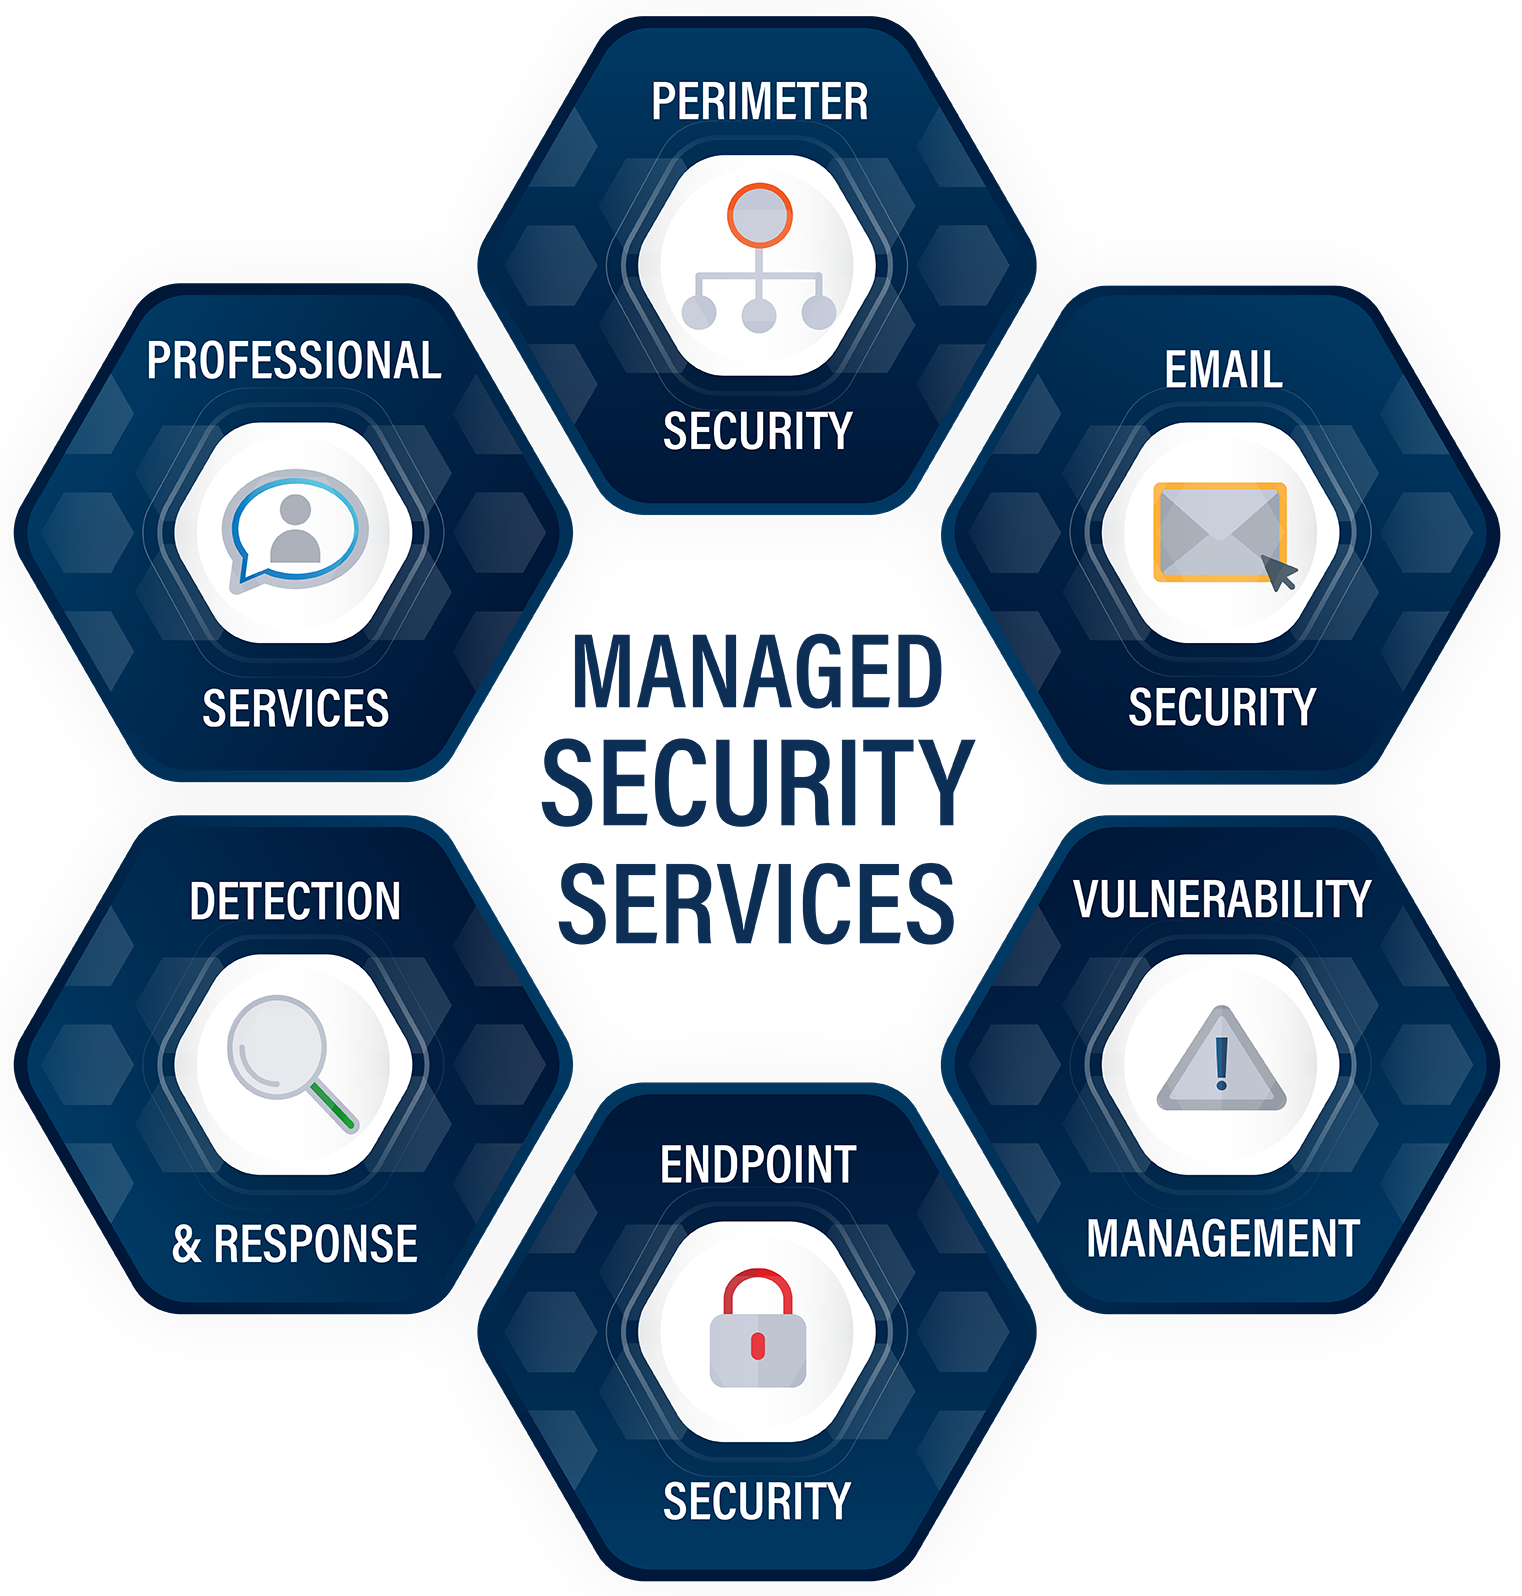 Our offerings assist companies in incorporating an adaptive security architecture into their operations.